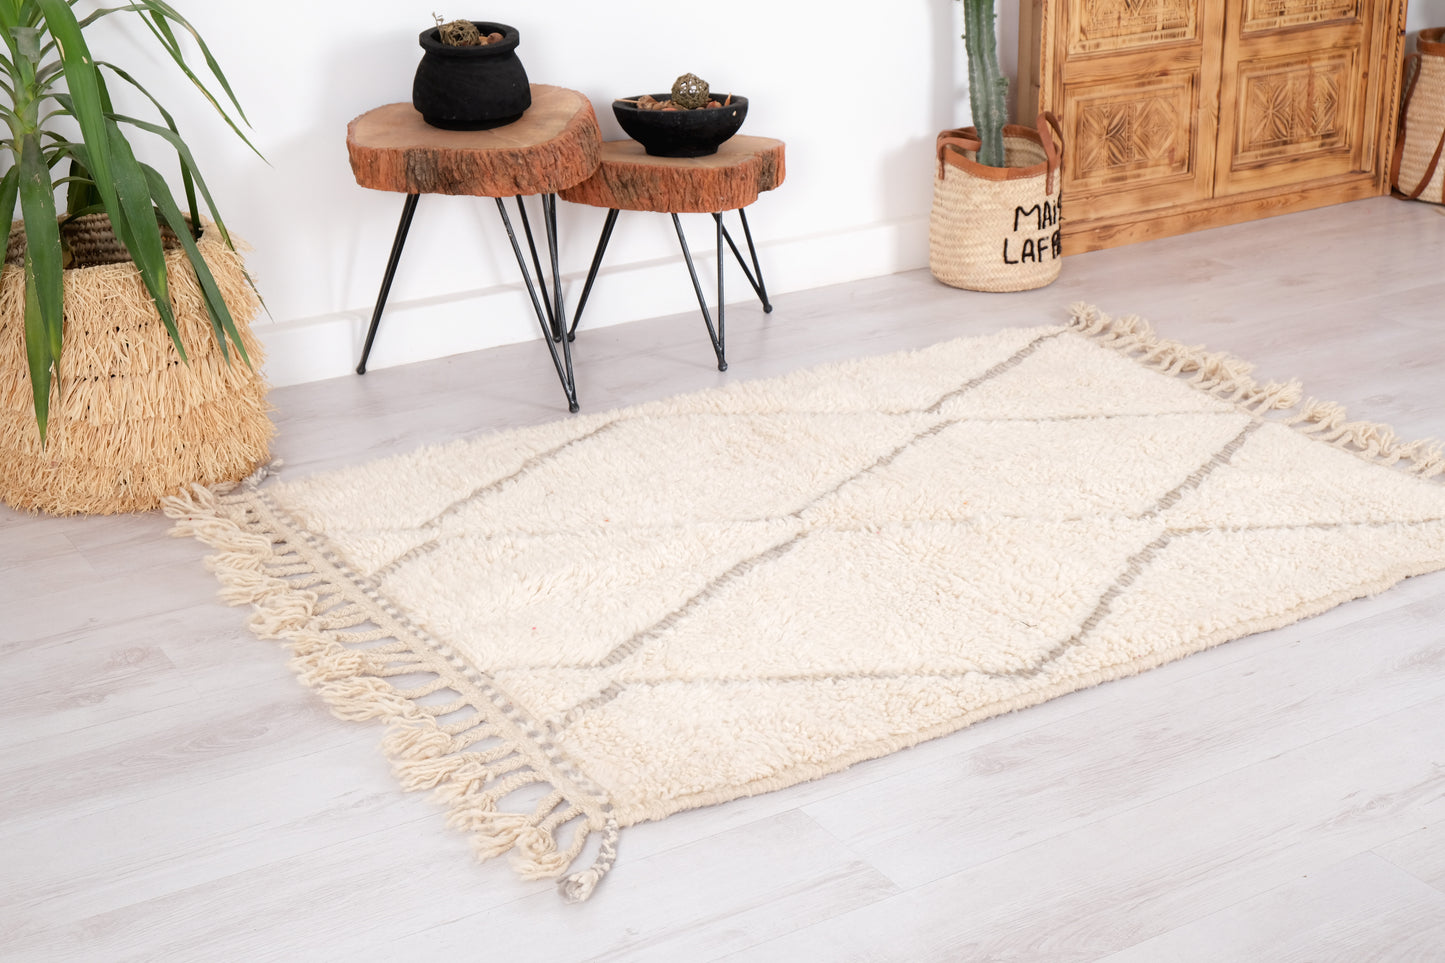 Beni Ourain Rug 4x5 ft – Ref. 1775